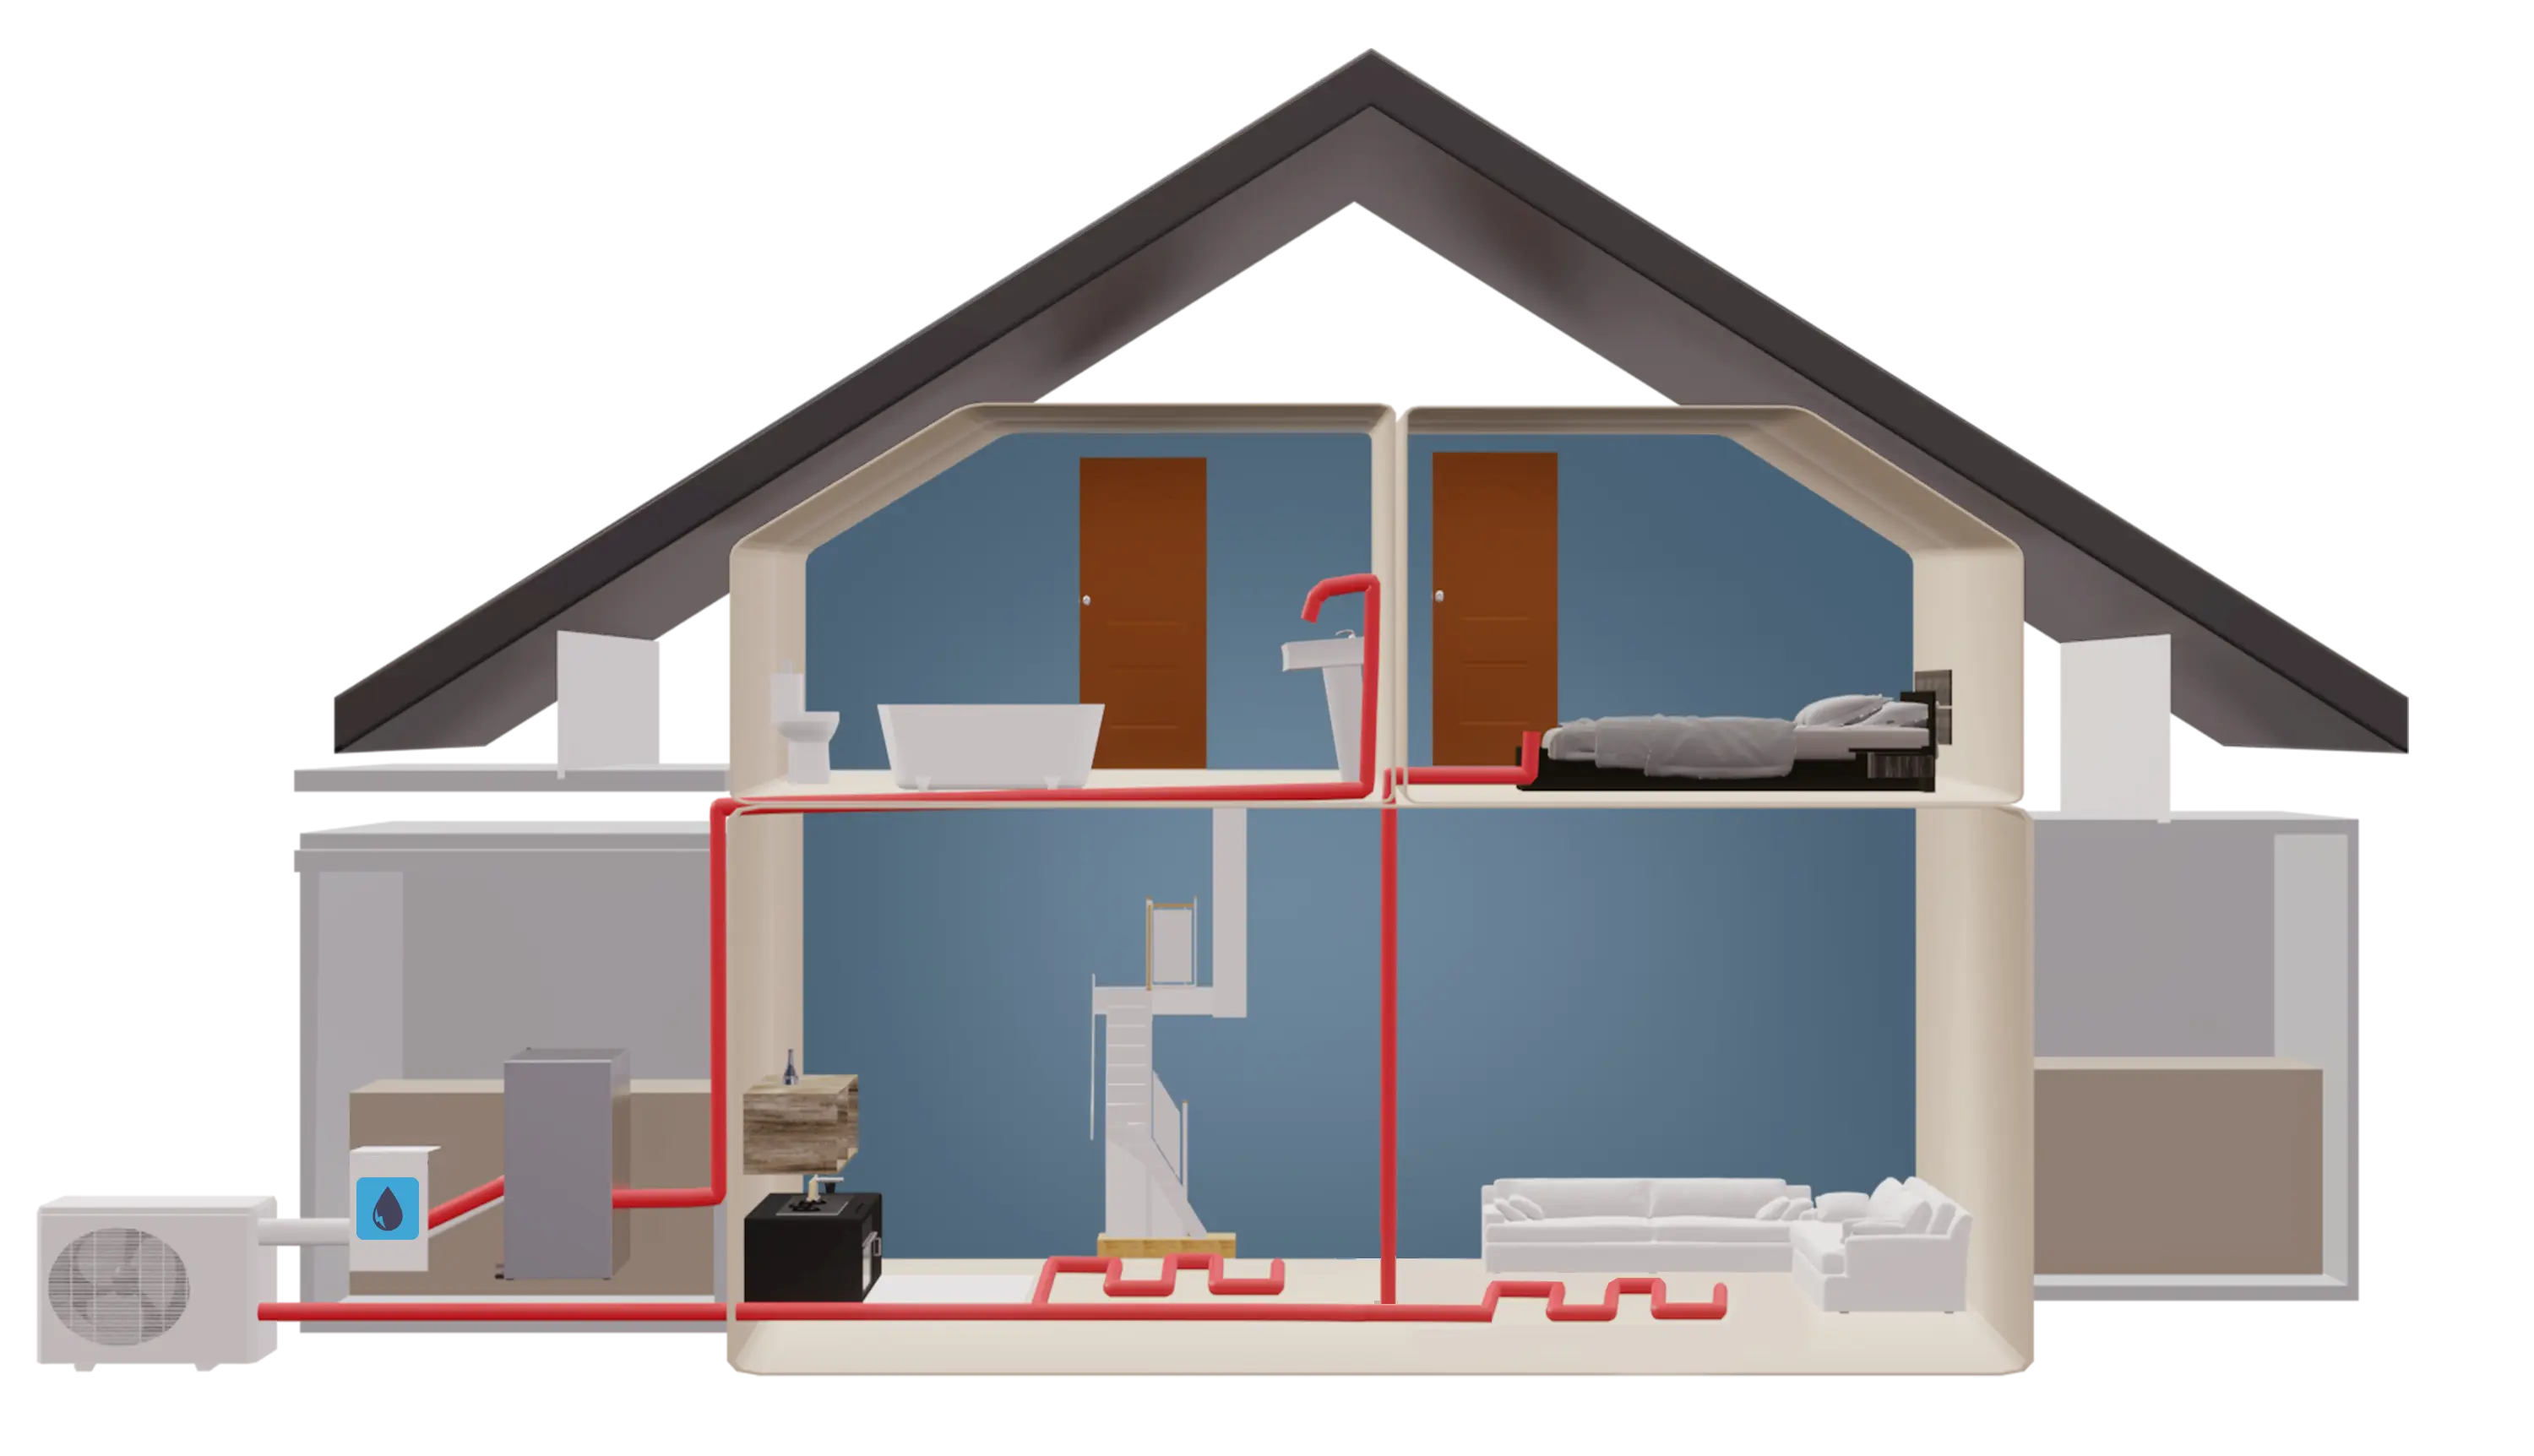 Diagram of a house with tooltips to show extra information about heating